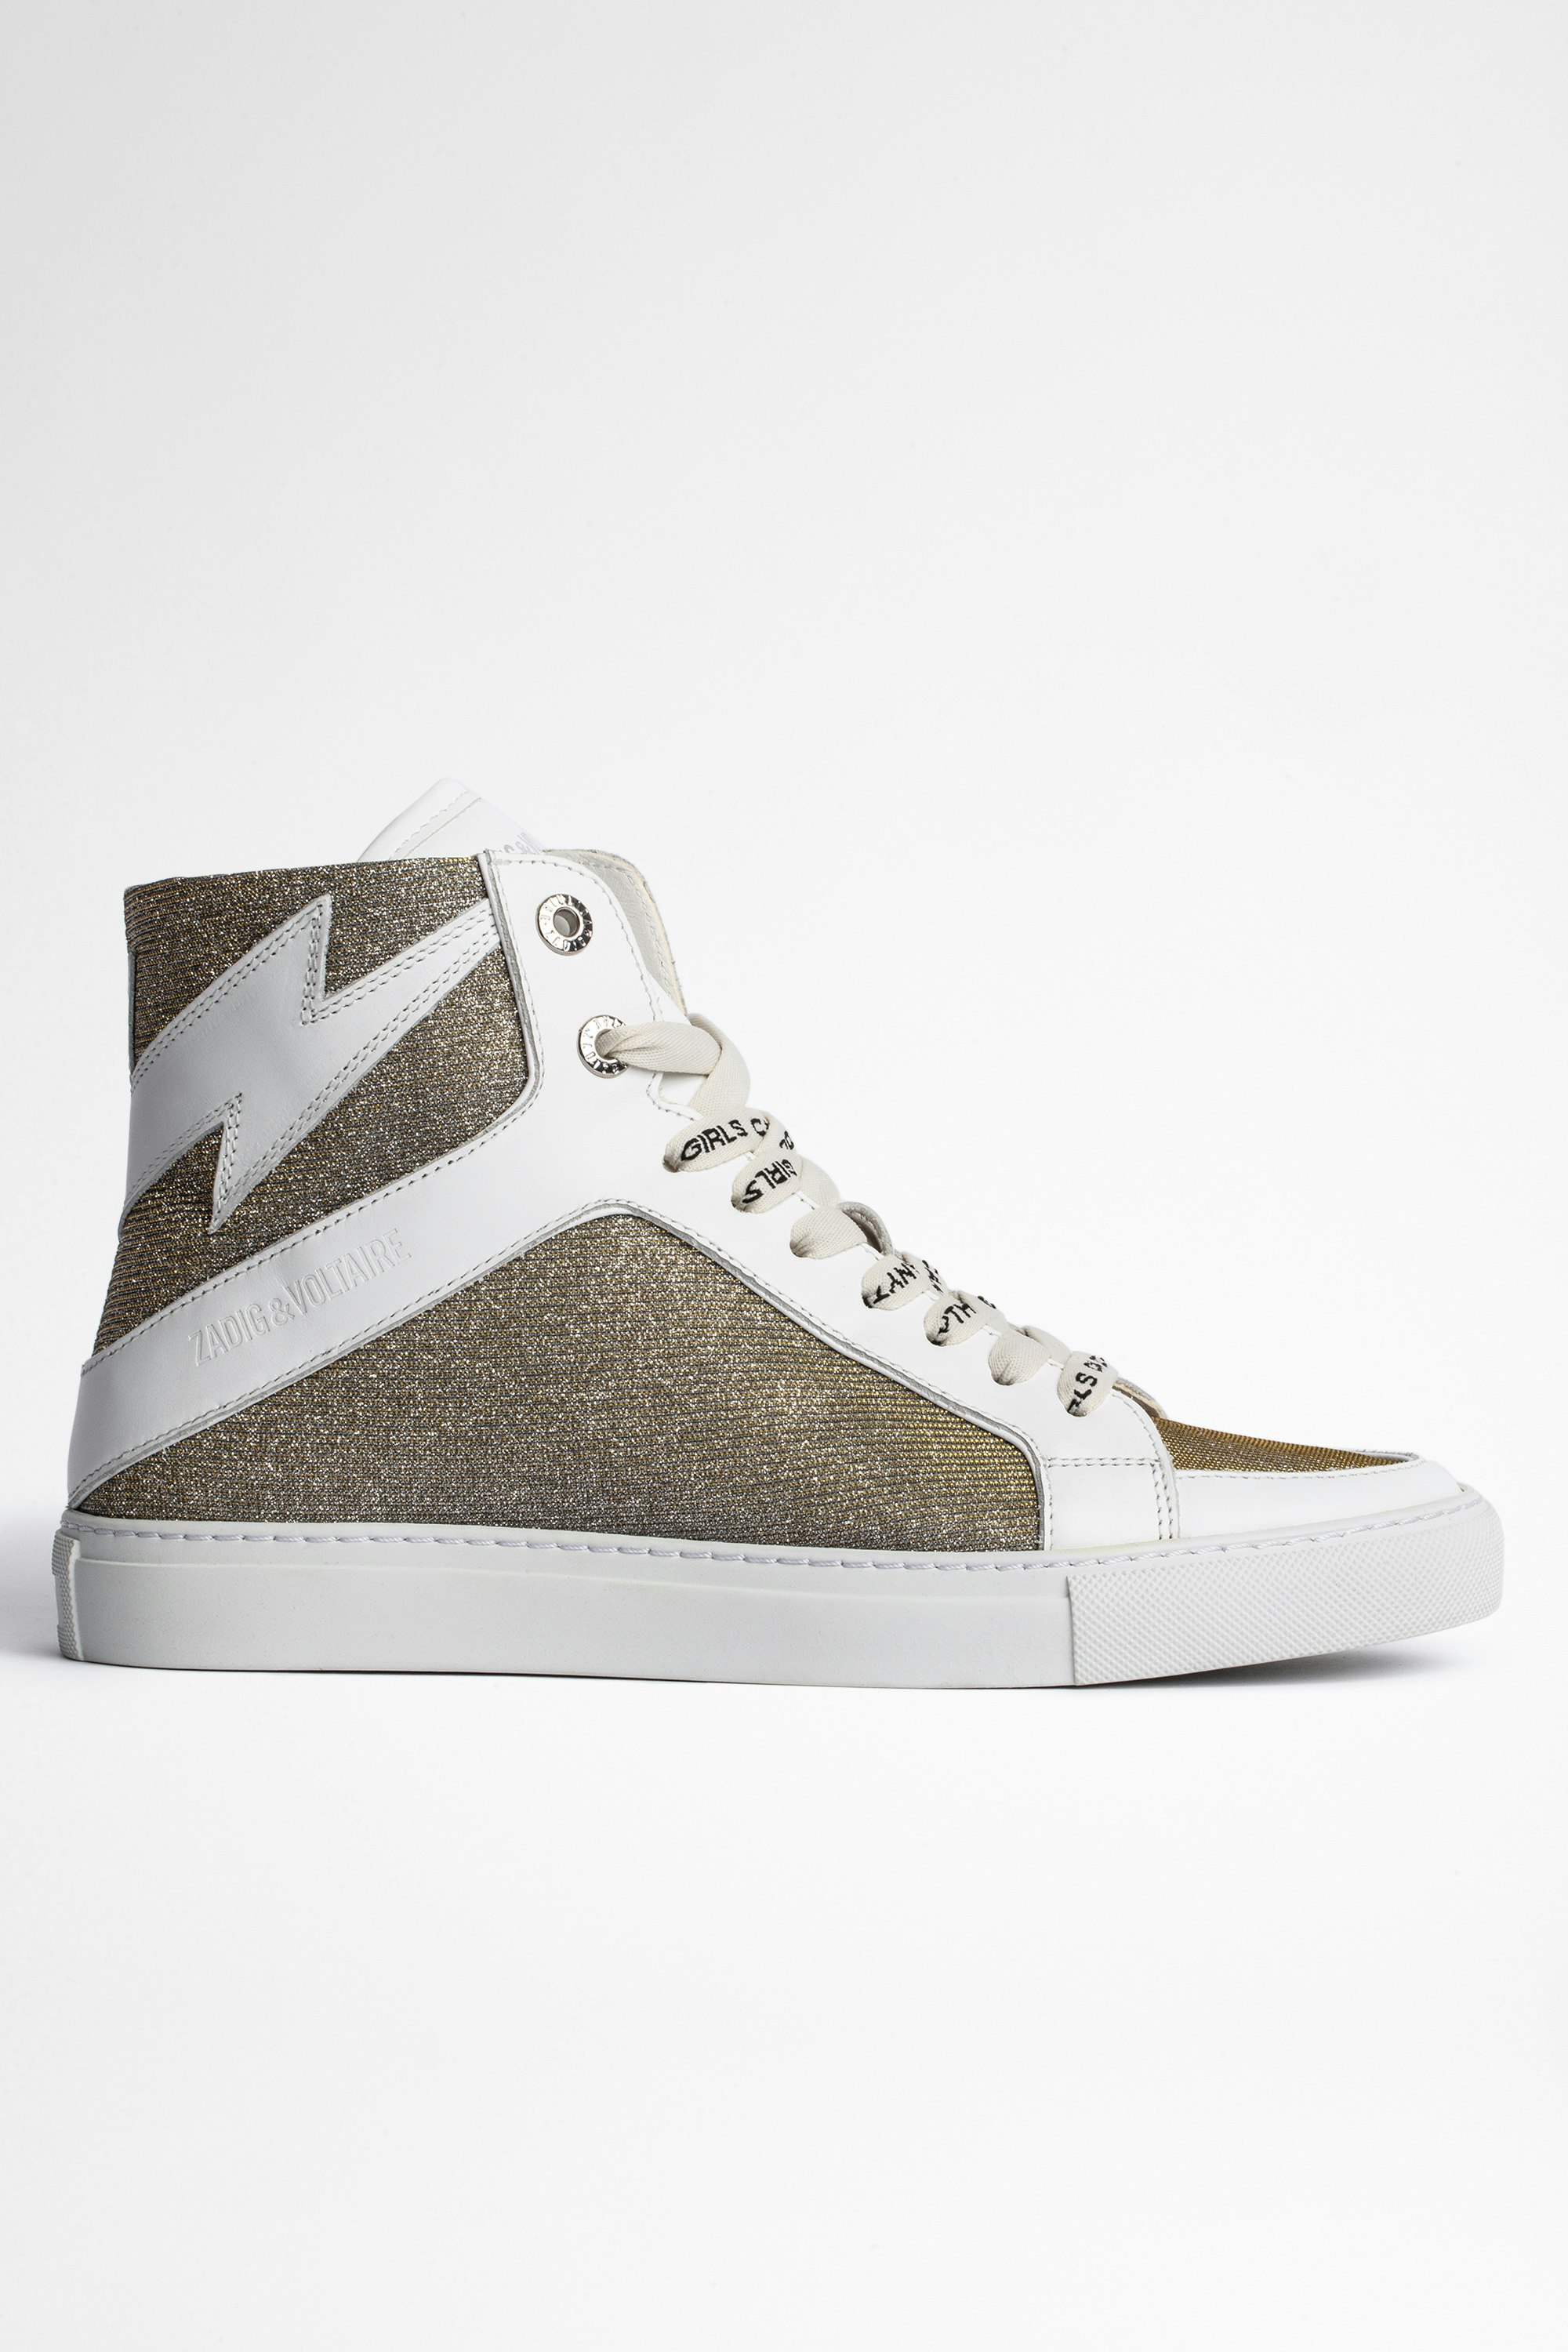 ZV1747 High Flash Sneakers Women's high-top sneakers in smooth white leather and silver glittery fabric